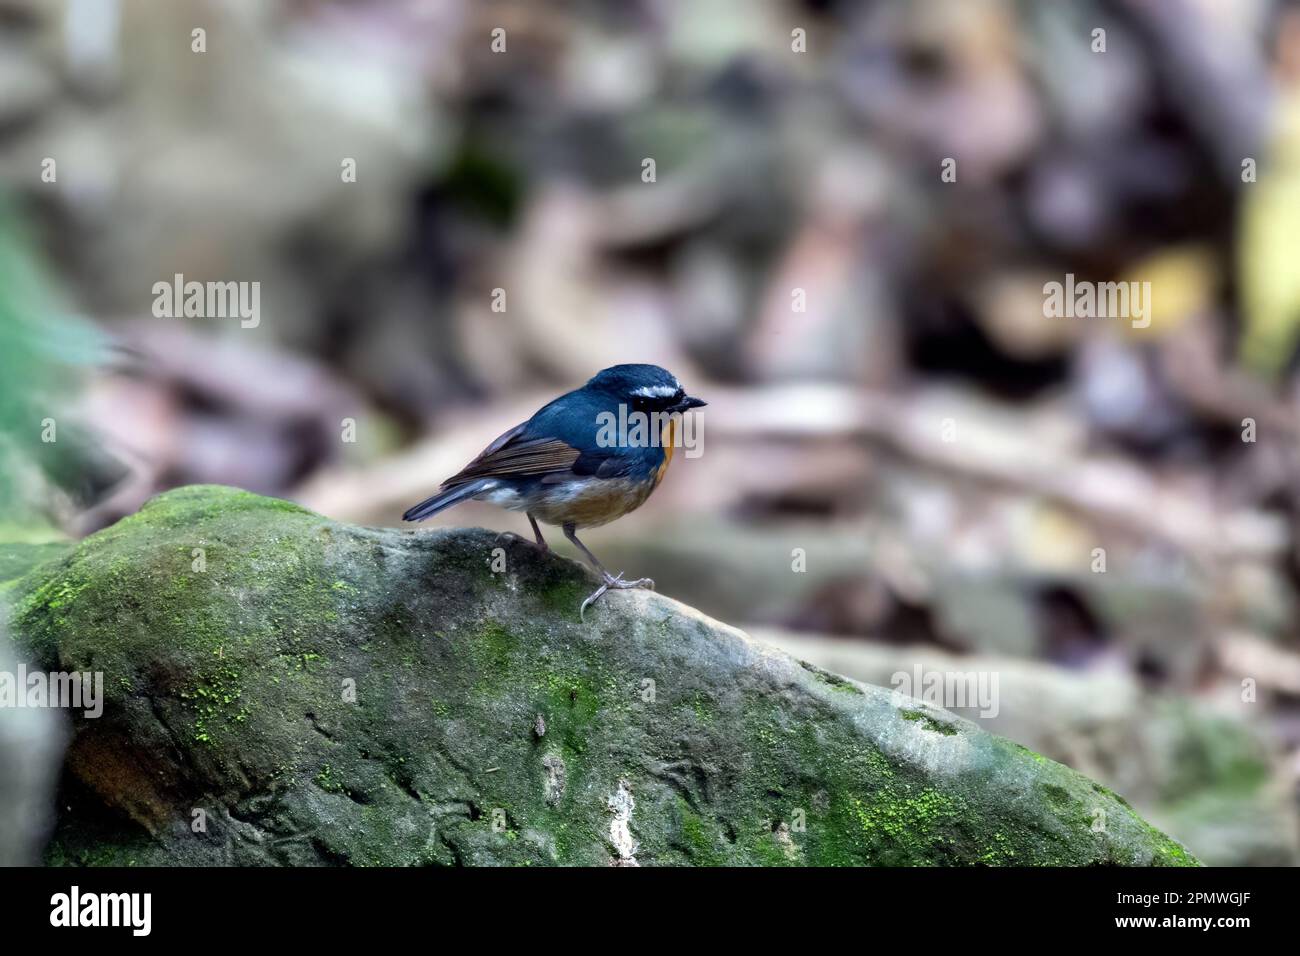 Snowy-browed flycatcher (Ficedula hyperythra) observed in Rongtong in West Bengal, India Stock Photo